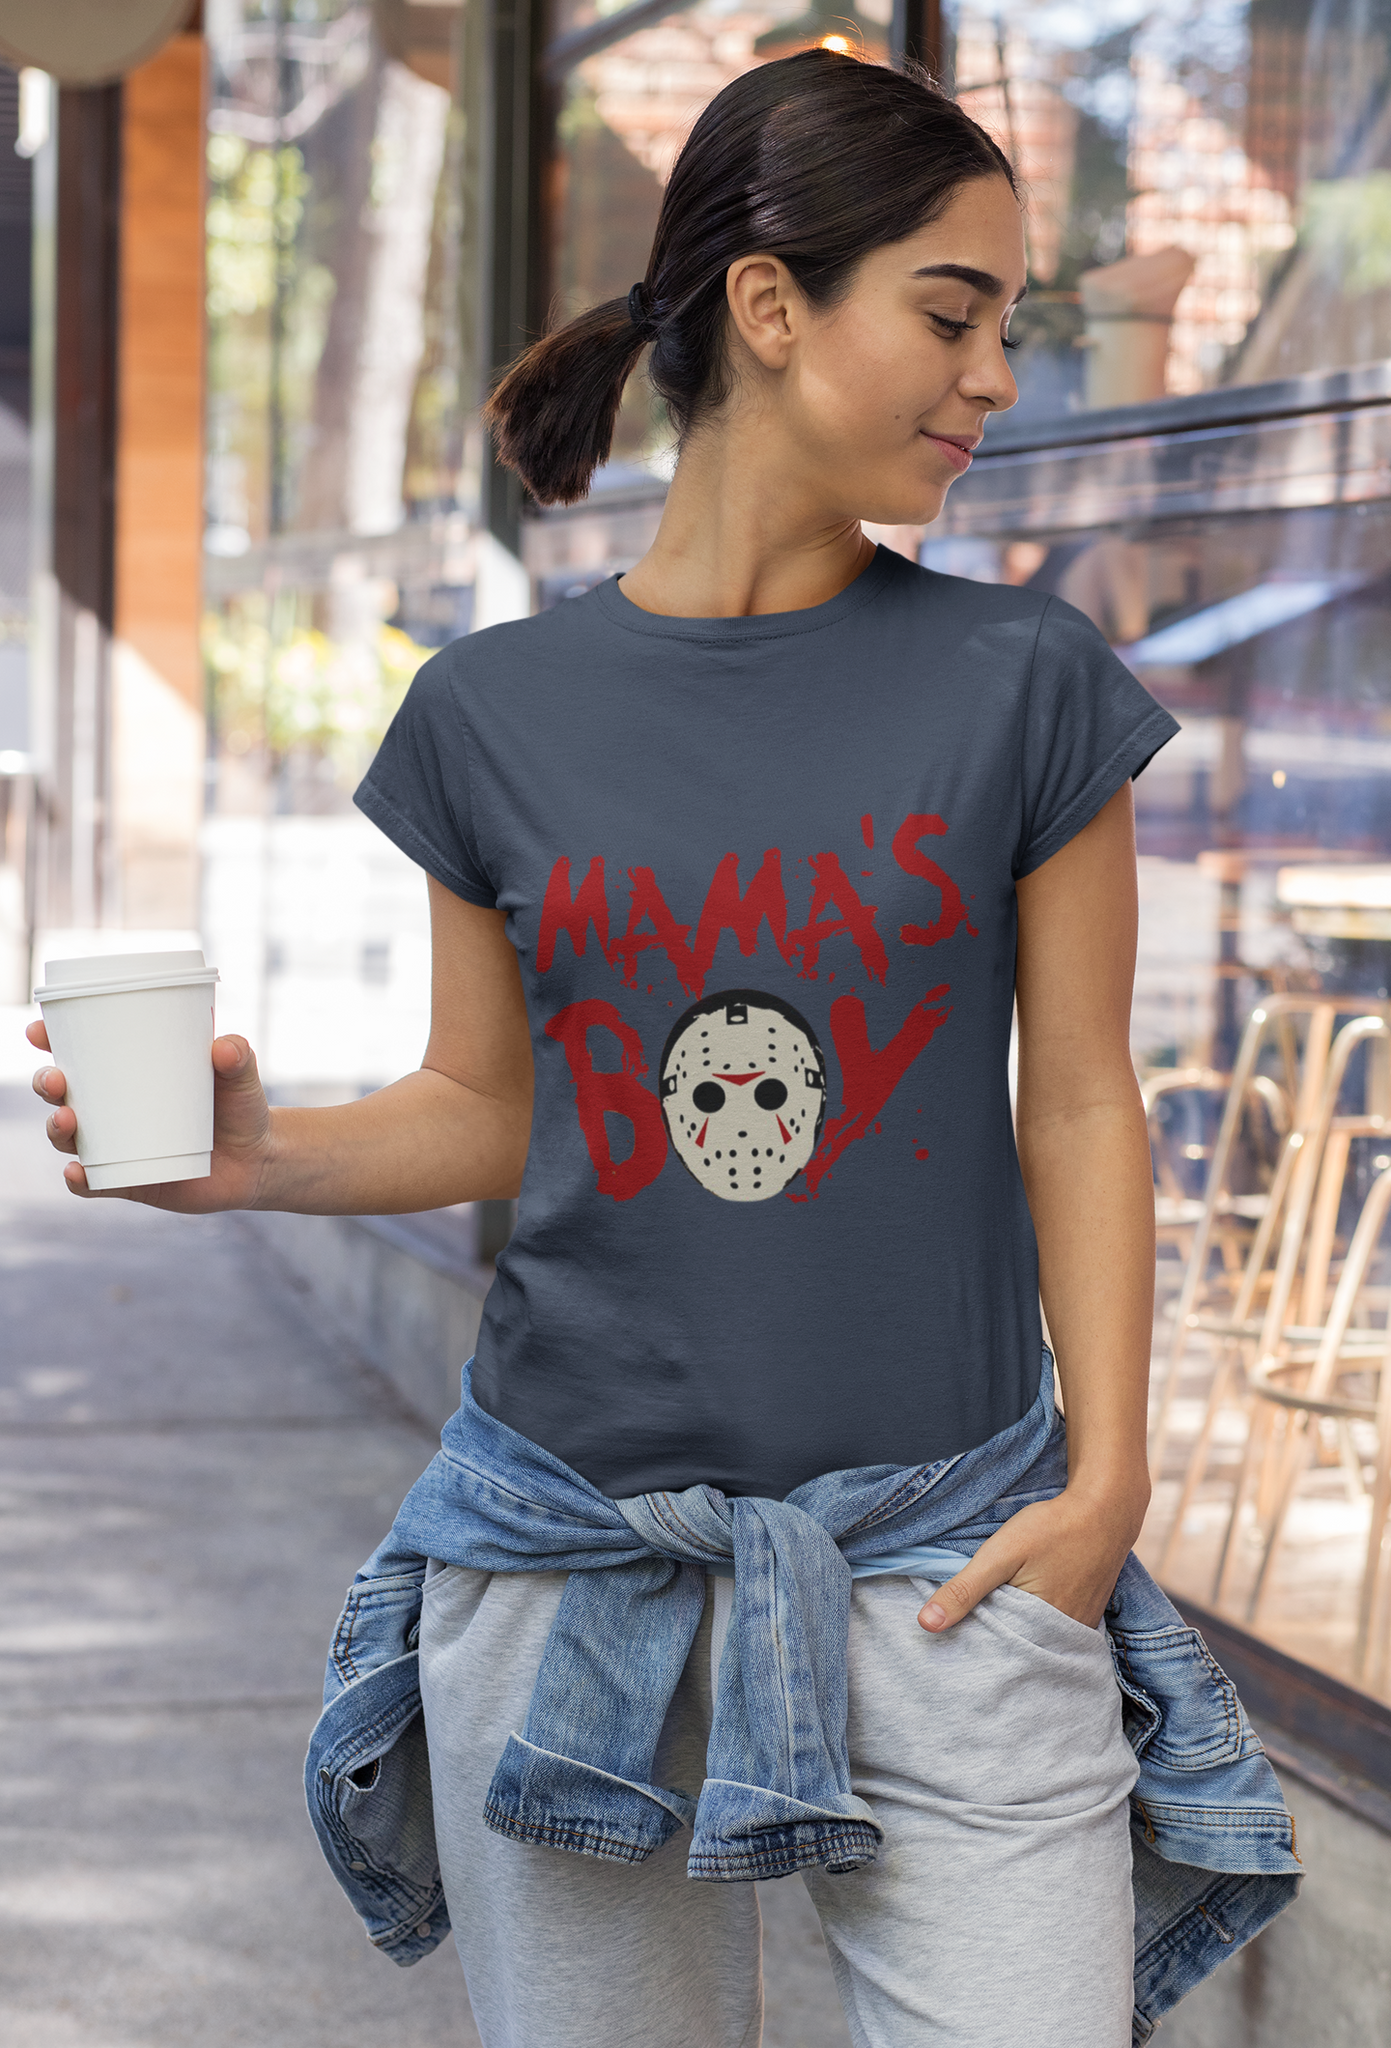 Friday 13th T Shirt, Mamas Boy Tshirt, Jason Voorhees Face T Shirt, Halloween Gifts, Mothers Day Gifts